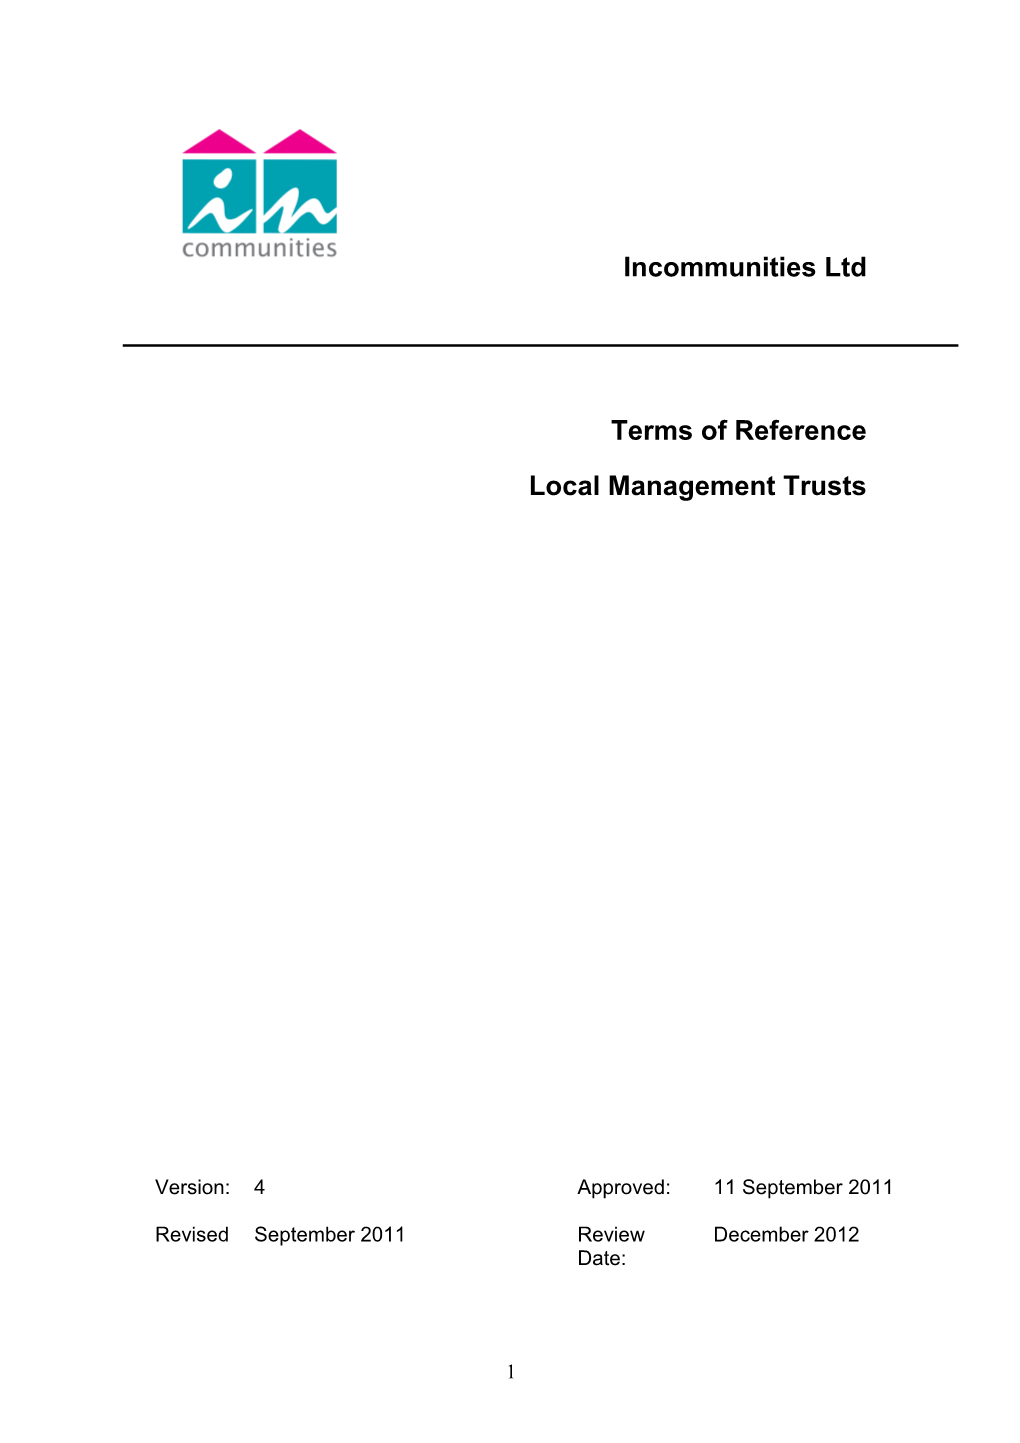 Local Management Trust Terms of Reference